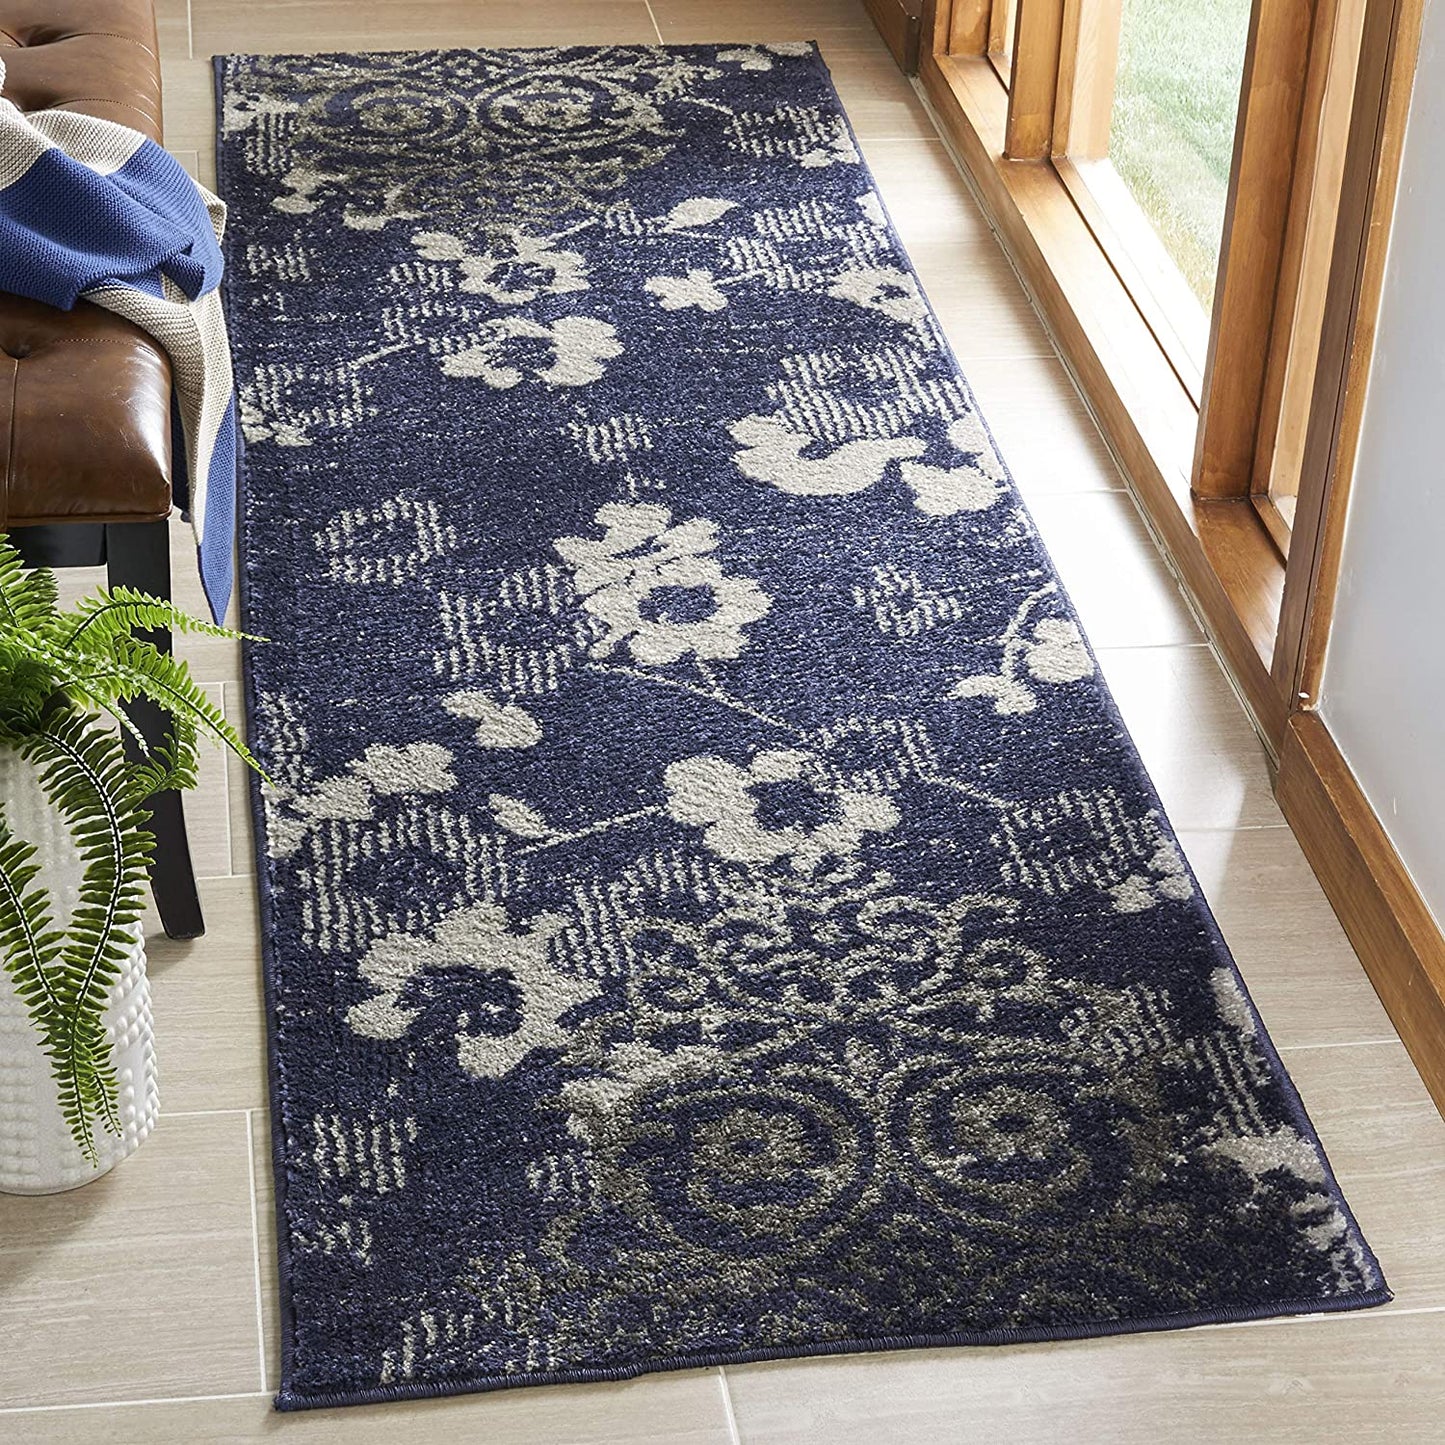 Navy Blue Silver Contemporary Chic Damask Soft Area Rug